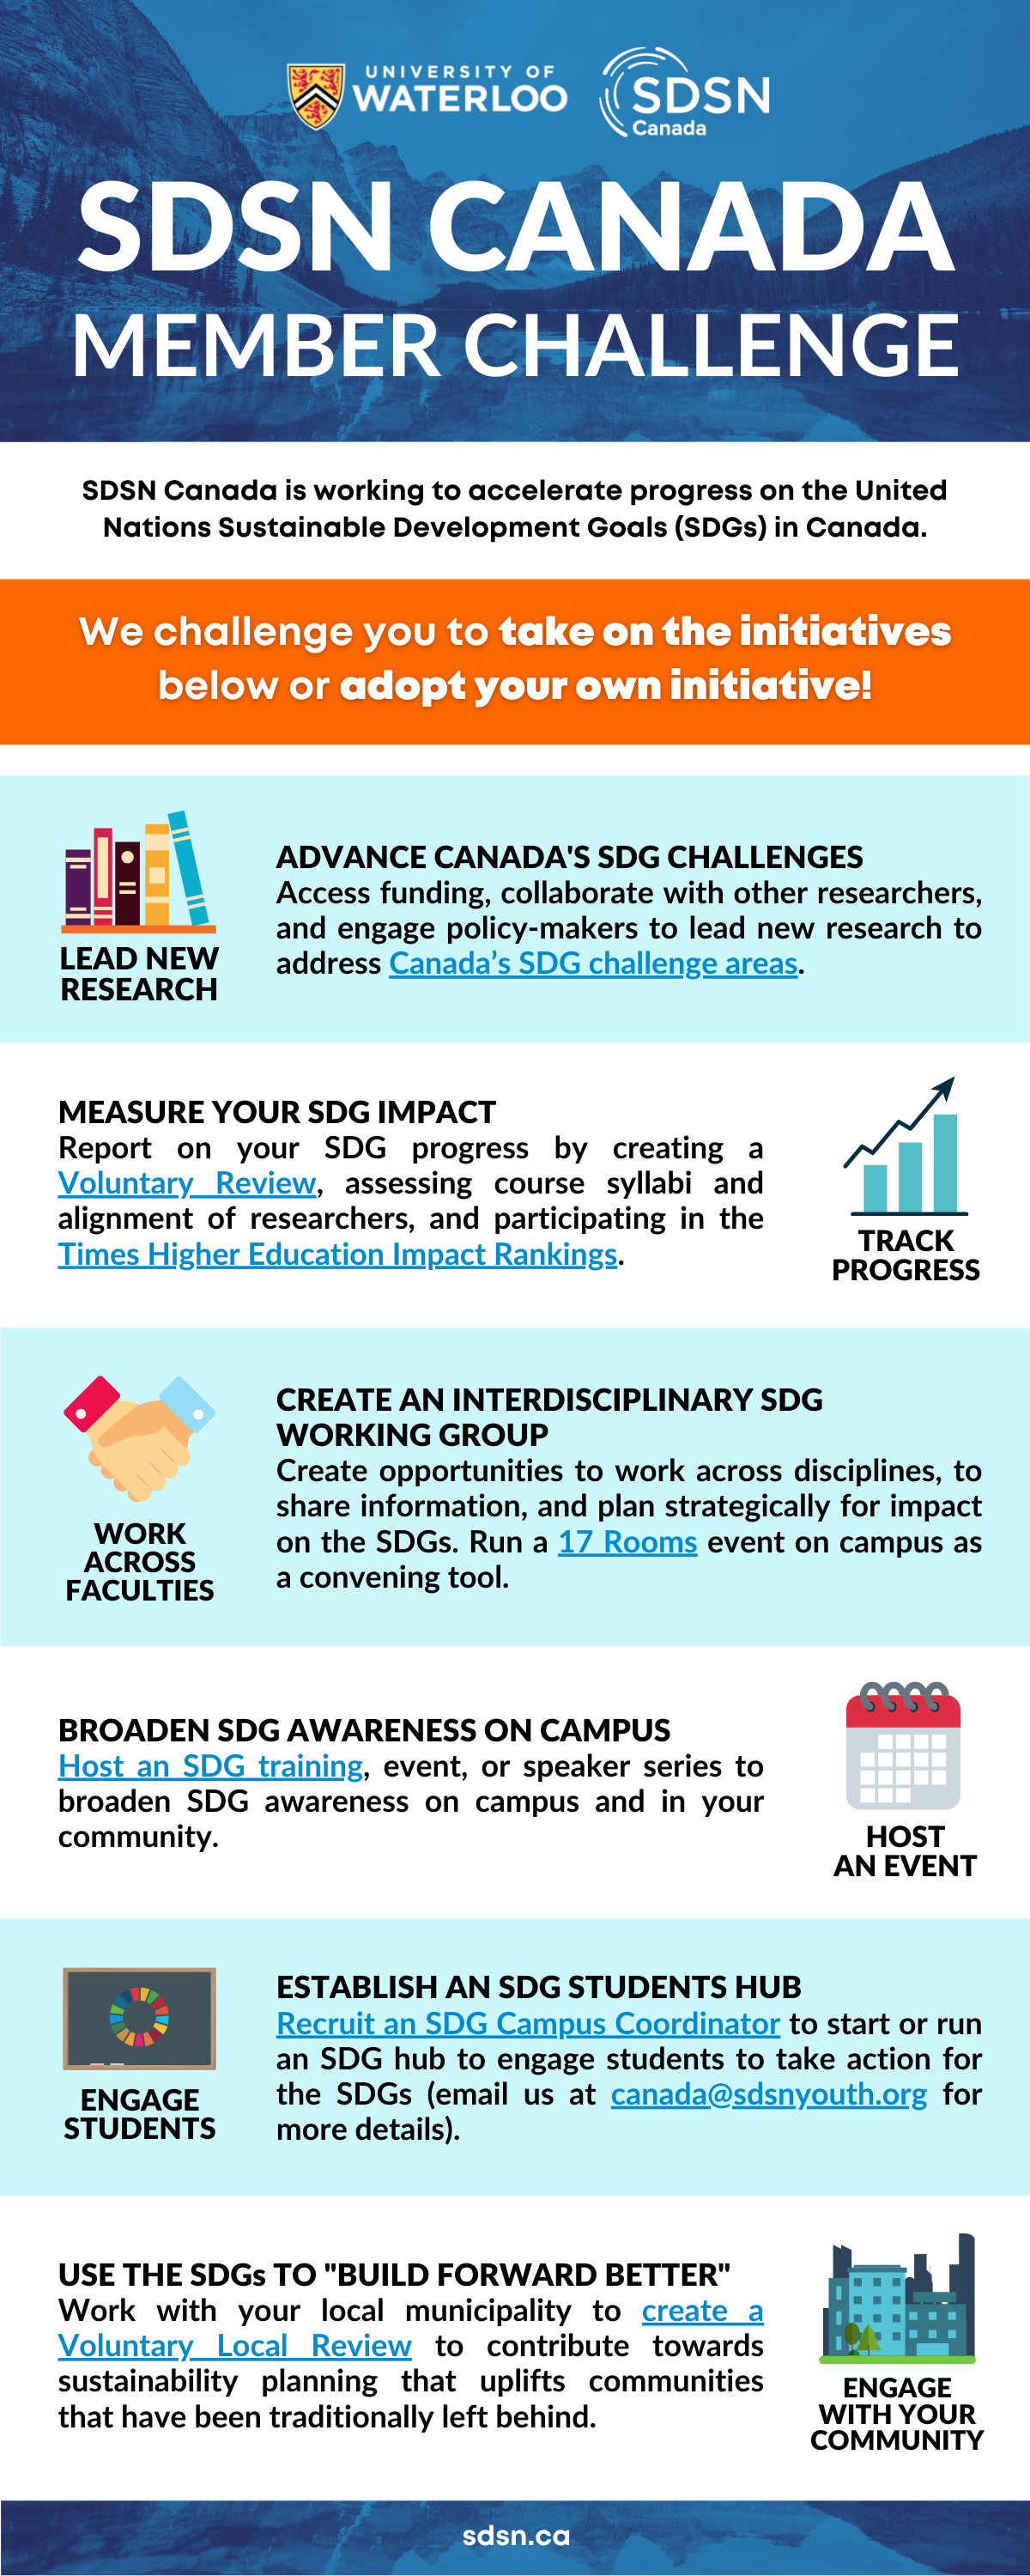 SDSN Canada 2021 Members Challenge Infographic